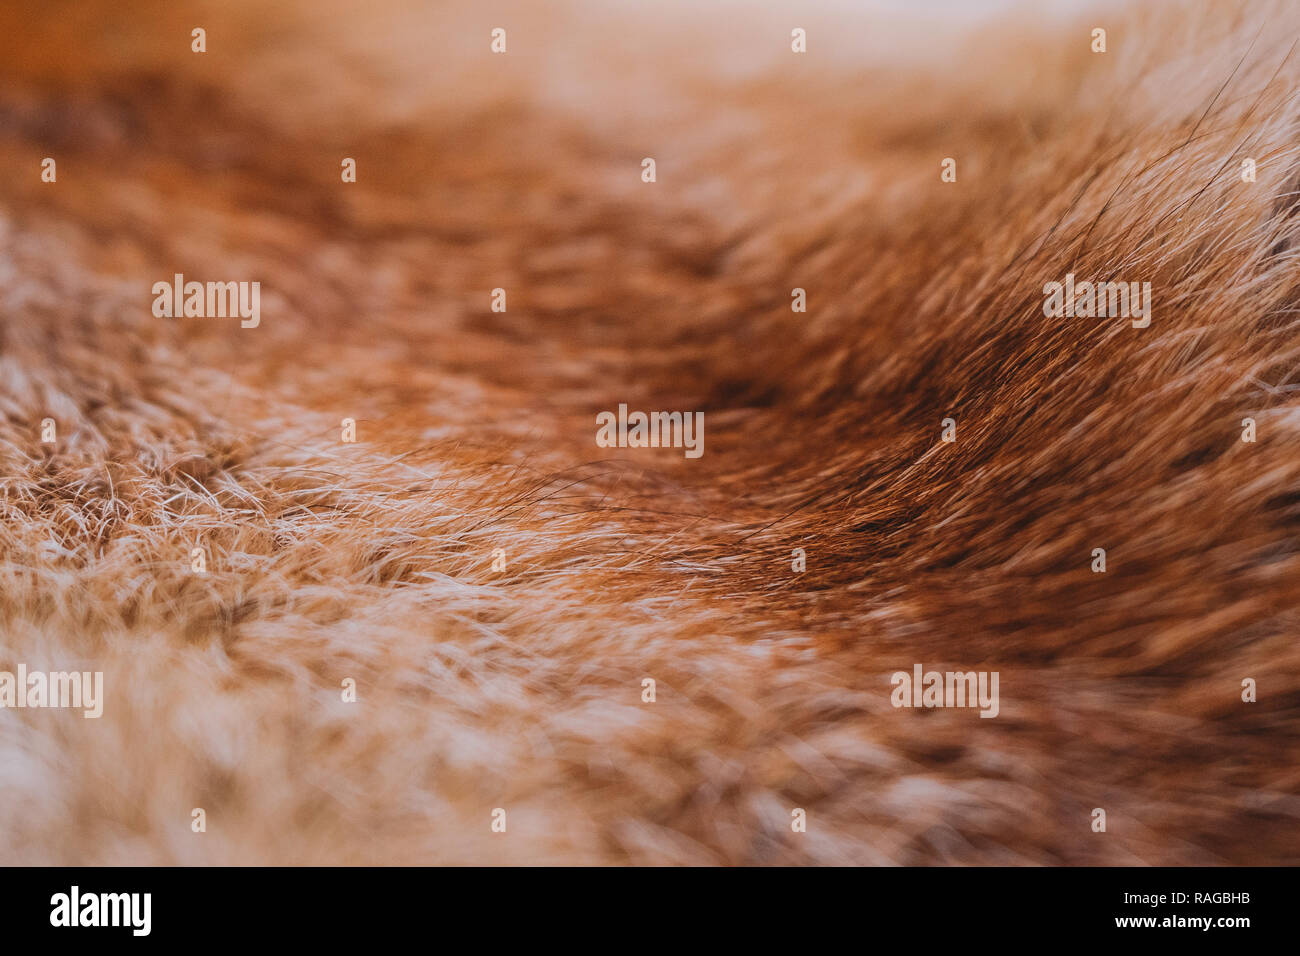 Closeup top view of texture of colorful real dead animal fur. Natural furry background. Horizontal color photography. Stock Photo